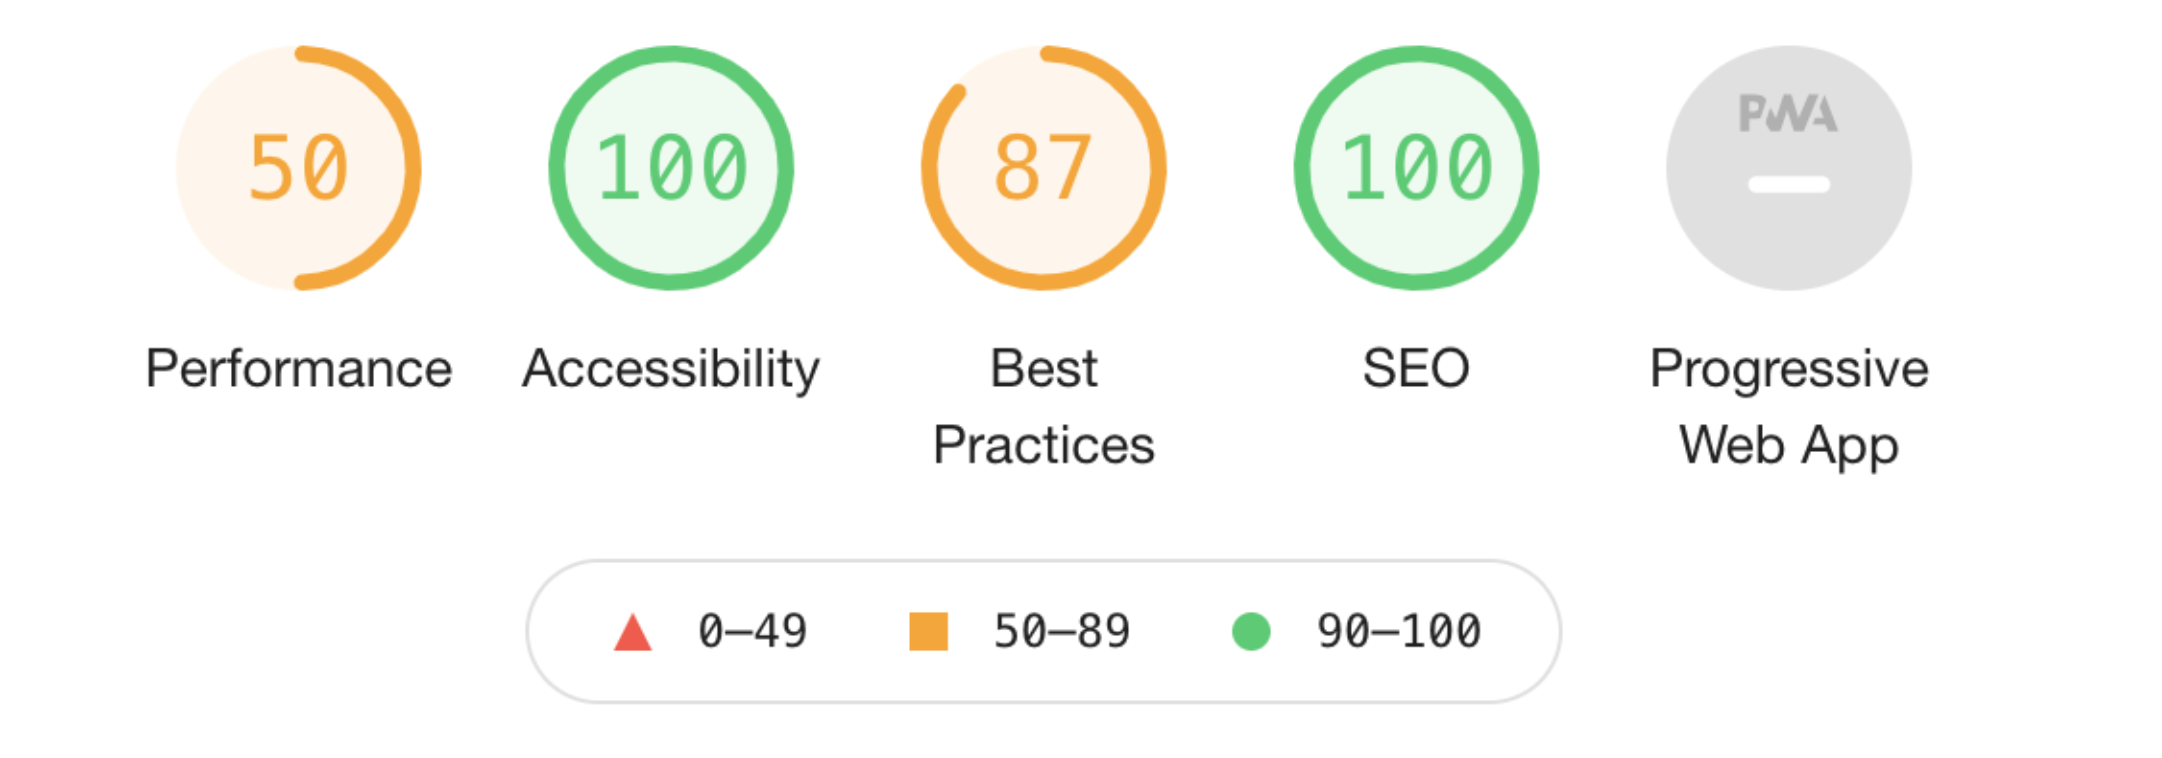 Mobile performance score as of July 16, 2021. The performance scoring scale shows that a score of 0-49 is considered “Poor”, a score of 50-89 is considered “Needs Improvement”, and a score of 90-100 is considered “Good”.